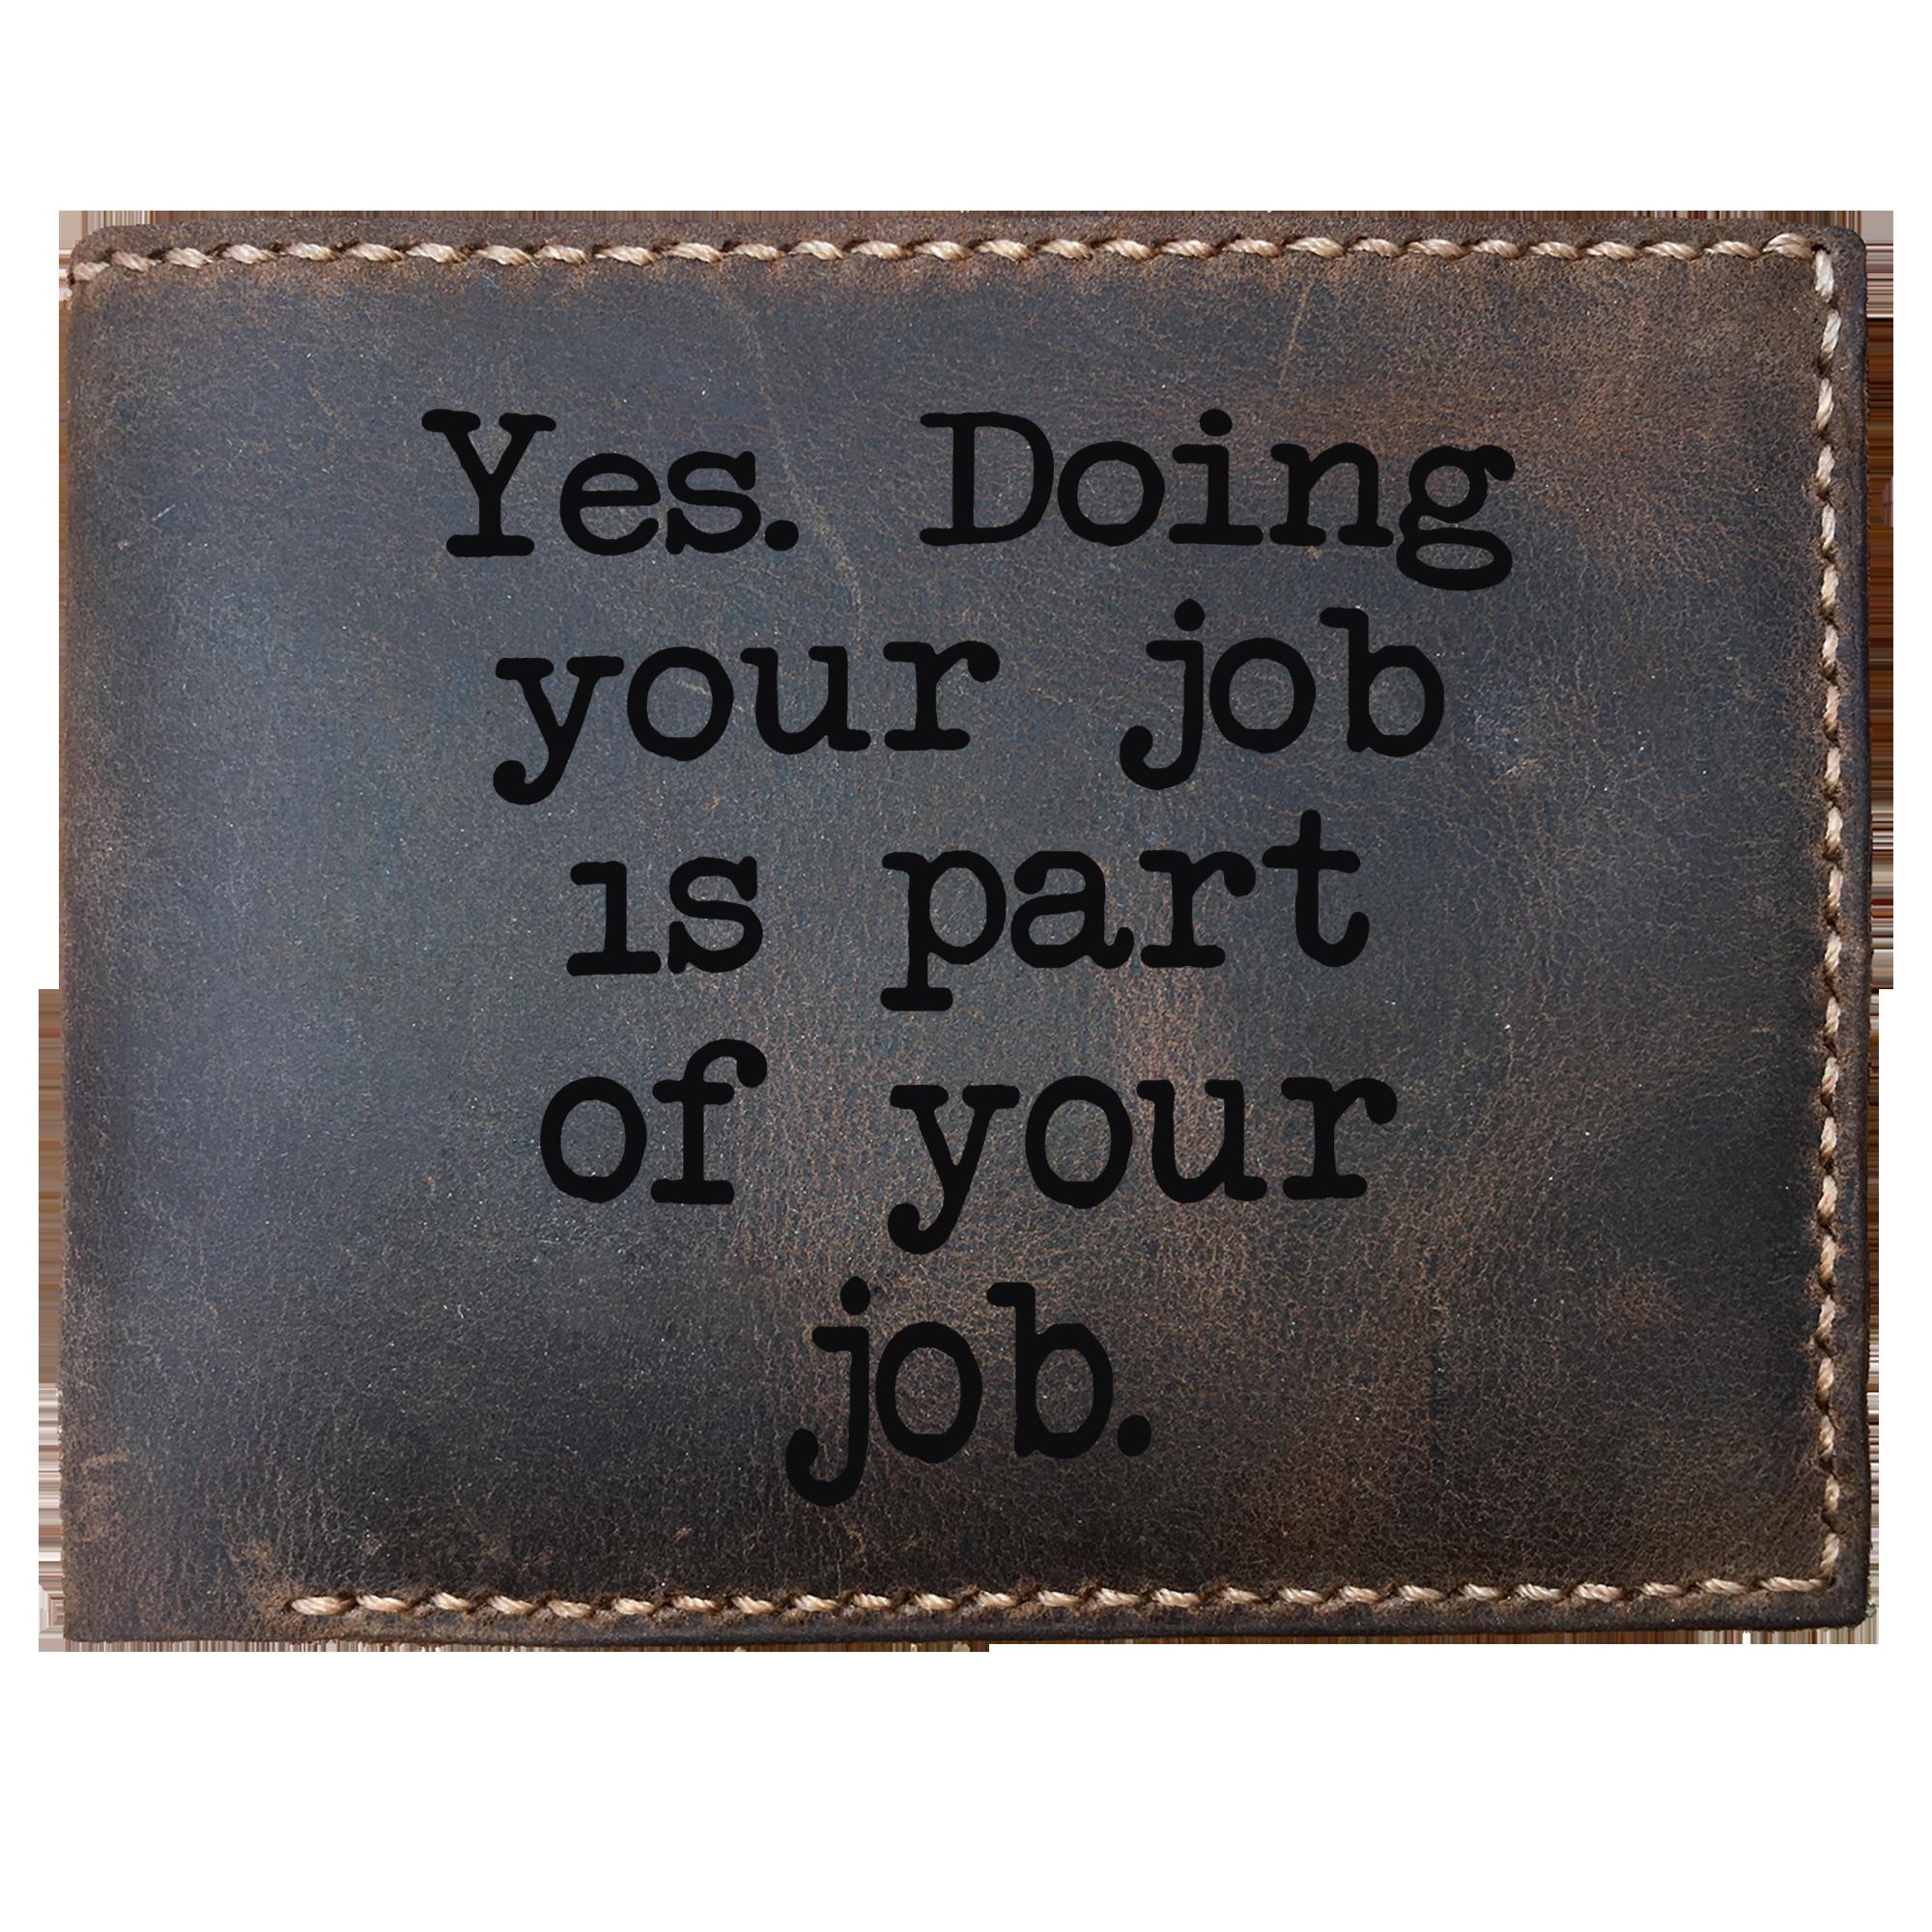 Skitongifts Funny Custom Laser Engraved Bifold Leather Wallet For Men, Yes. Doing Your Job Is Part Of Your Job